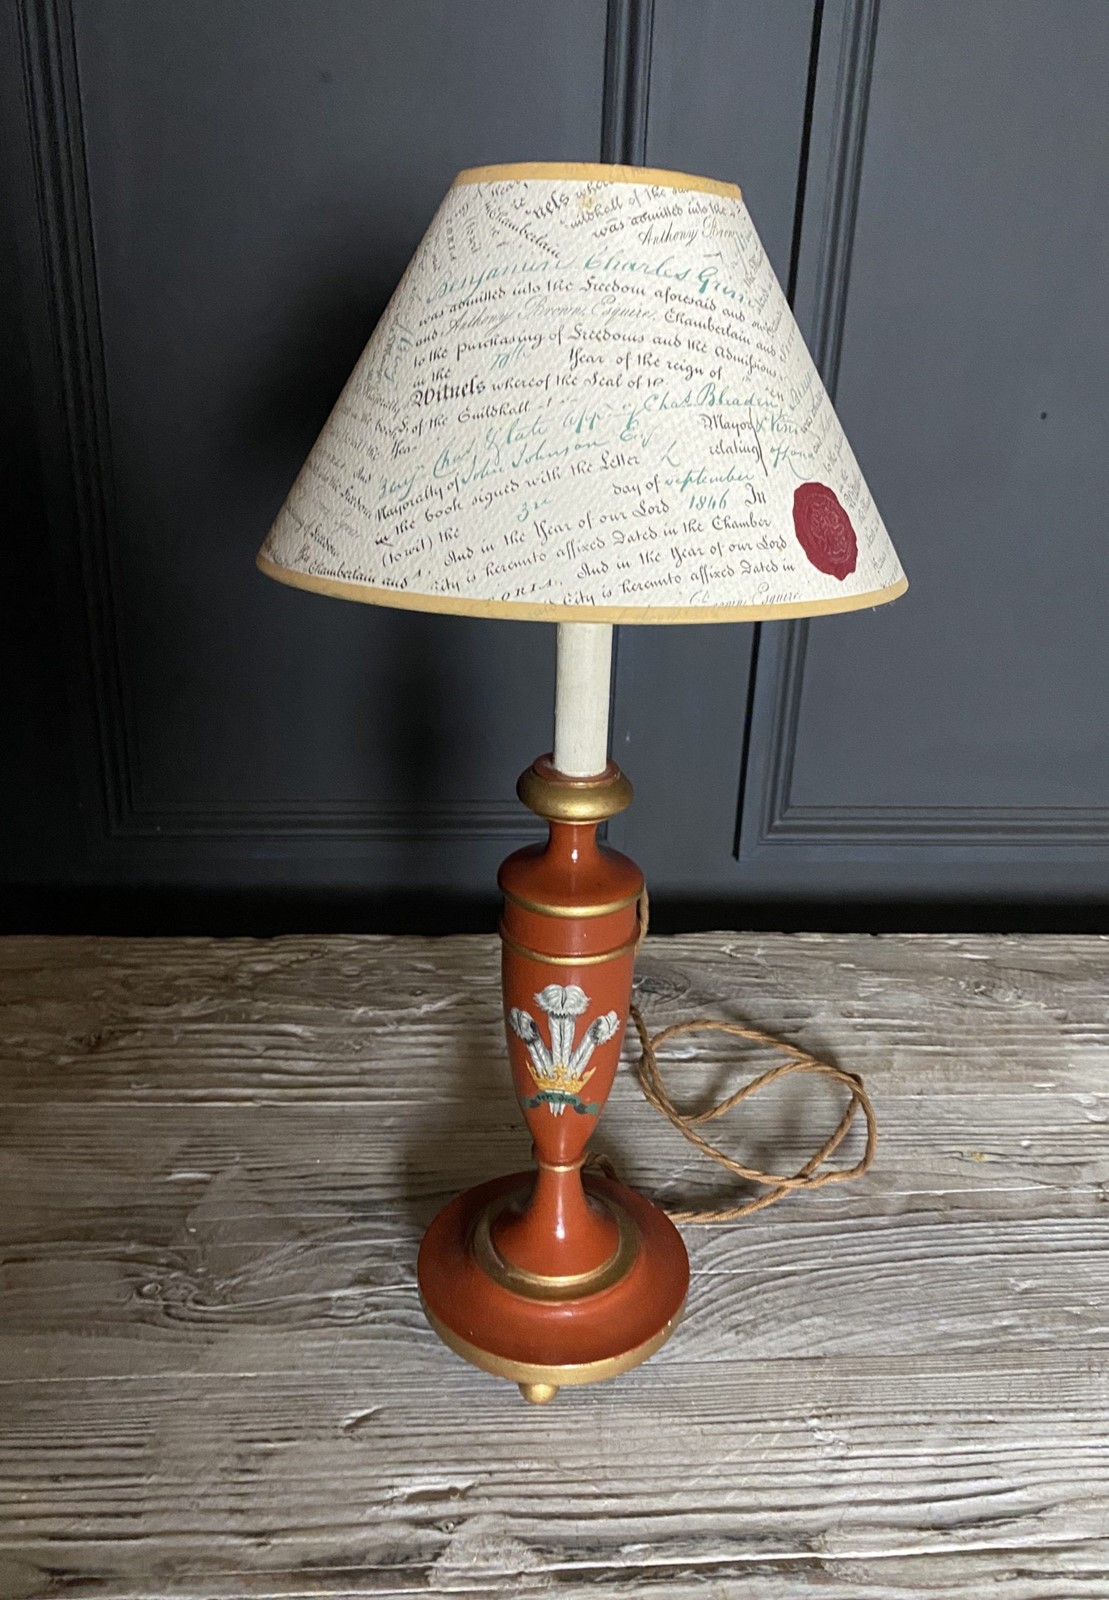 Prince Of Wales Red Table Lamp - Decorative Collective